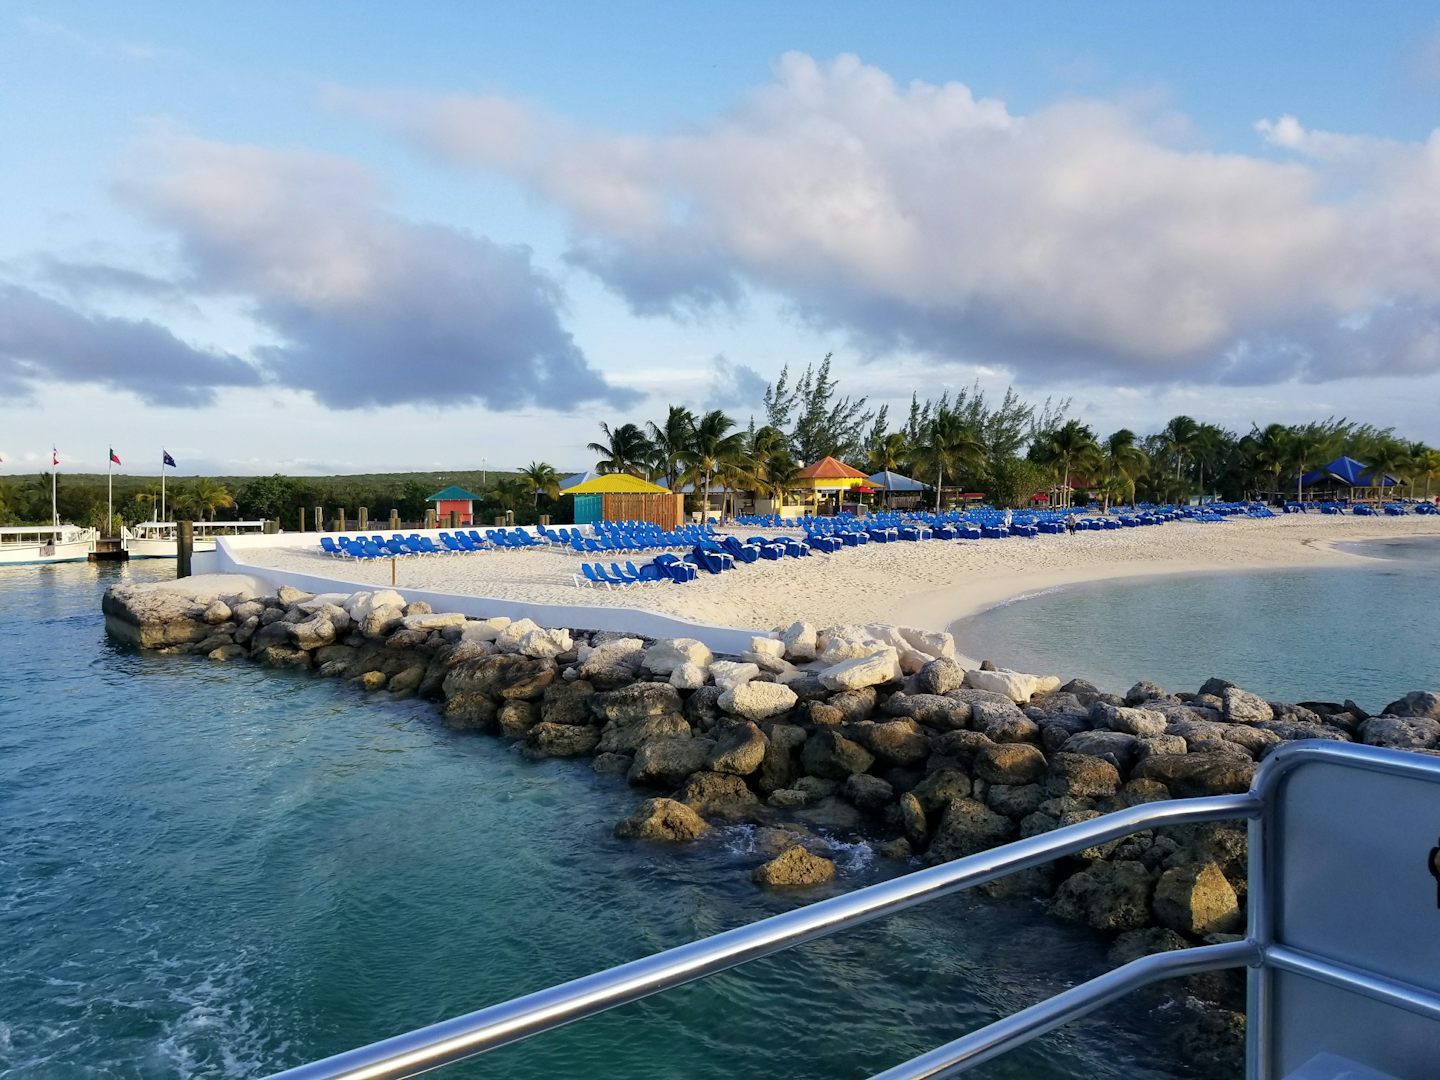 Princess Cays -- Wish we could have stayed here for a couple of days.